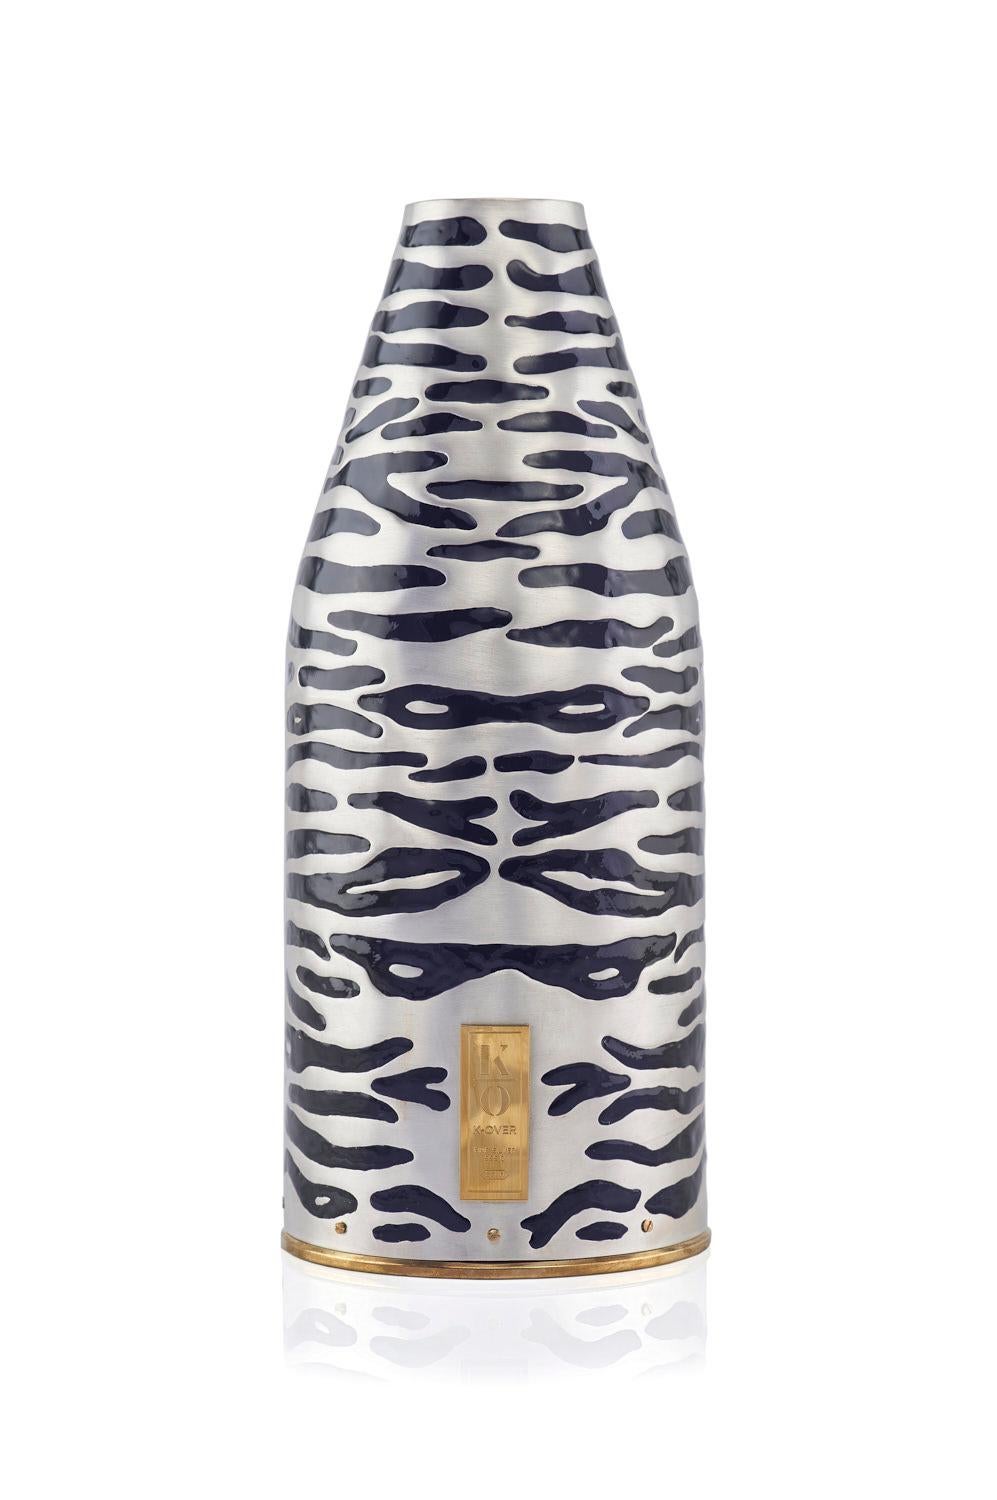 ZEBRA :
Our K-OVERs, are alternatives to the champagne bucket and the more common glacette.  The precious metal that holds the bottle is coated internally with a thermal fabric that maintains the temperature of your champagne for about 2 hours. The